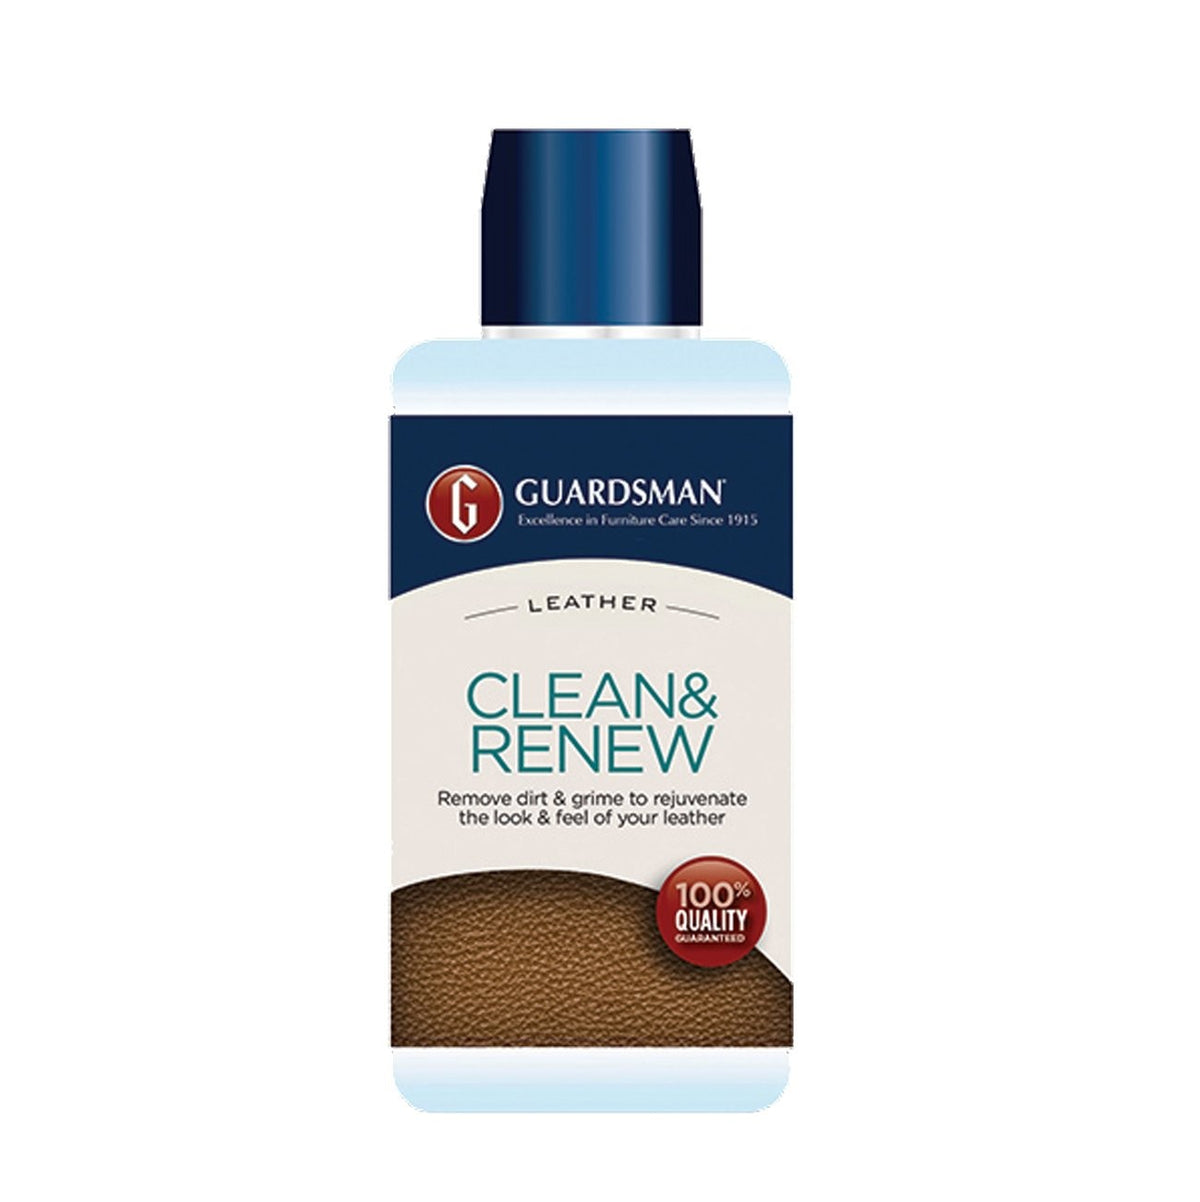 Guardsman Leather Clean and Renew Step 1 Bottle 250ml